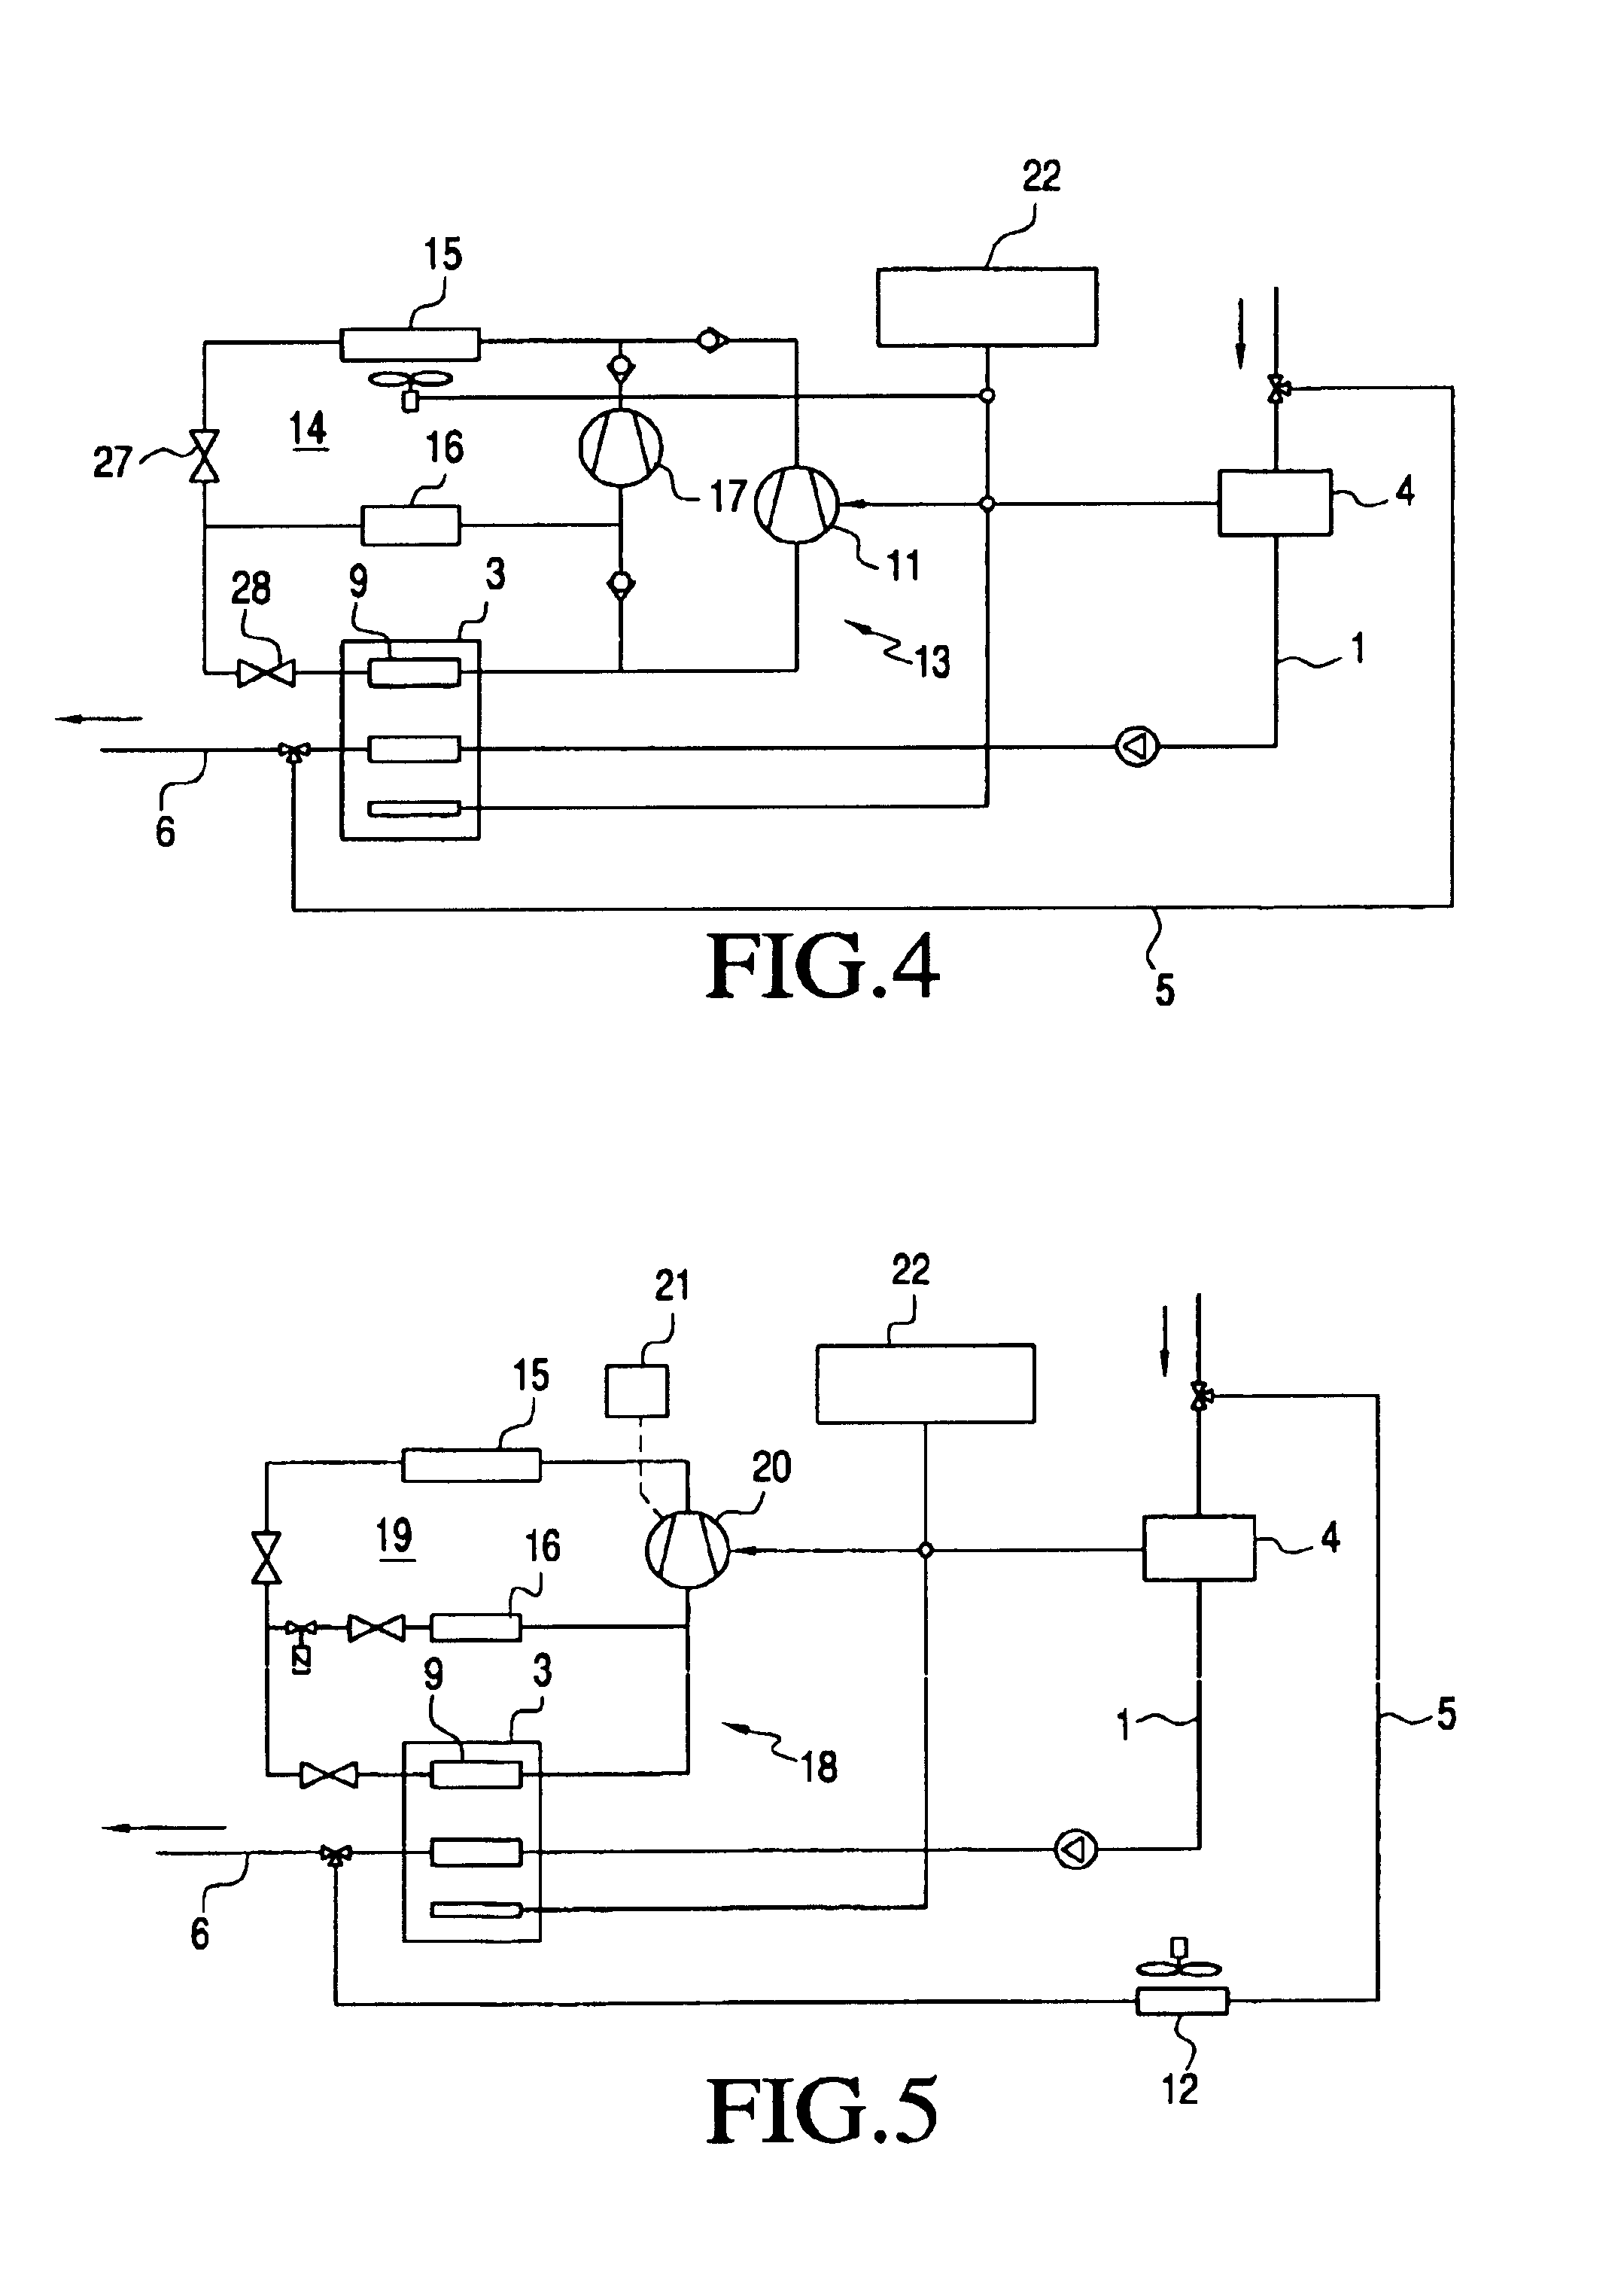 System with an internal combustion engine, a fuel cell and a climate control unit for heating and/or cooling the interior of a motor vehicle and process for the operation thereof